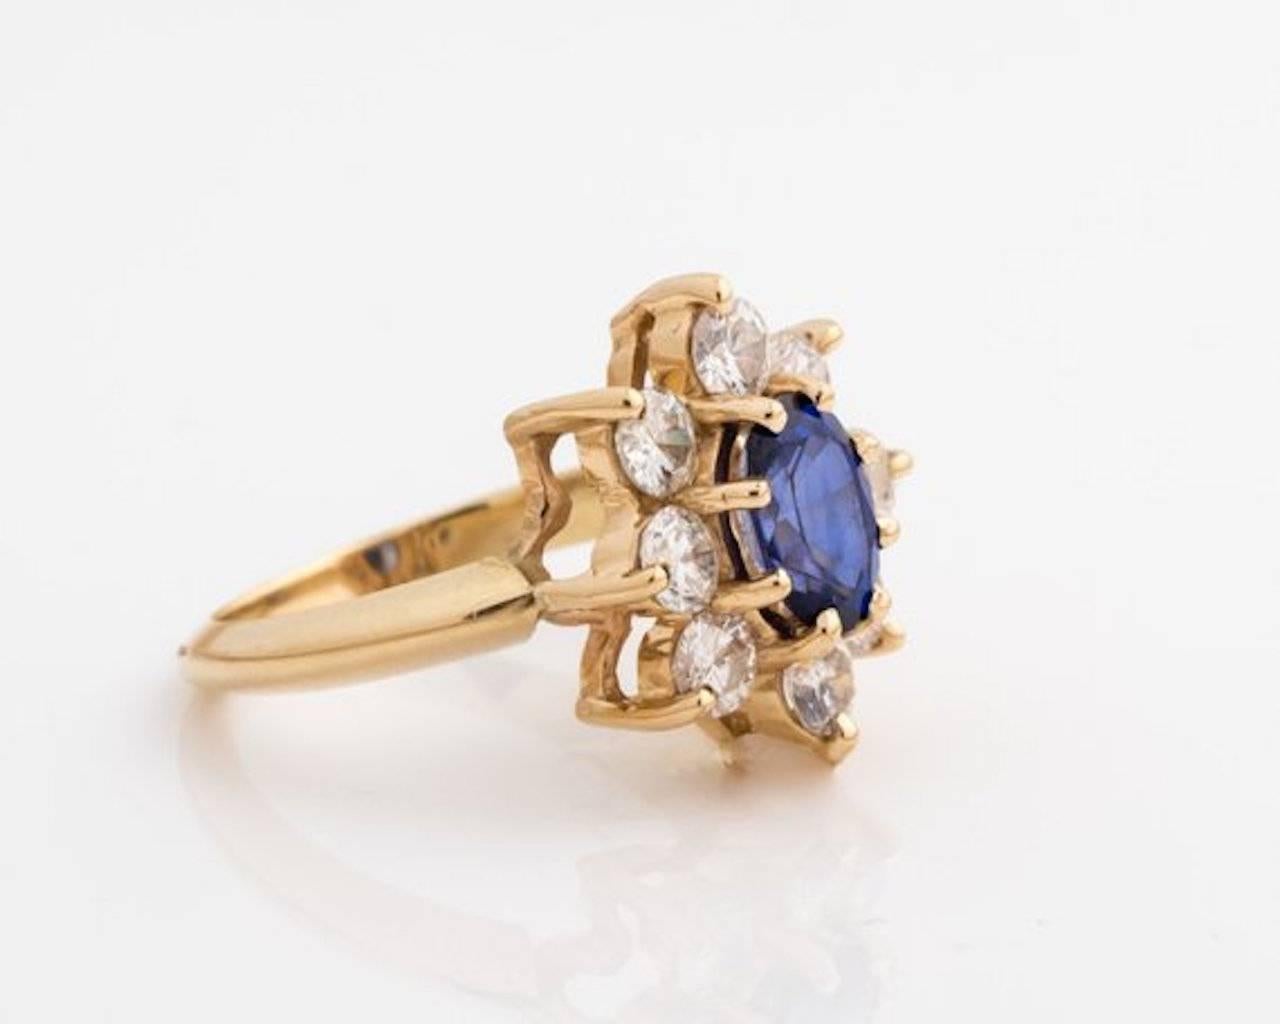 1960s Retro Sapphire, Diamond Halo Ring - 14k Yellow Gold, Sapphire, Diamonds

Features an 8-prong set, oval Sapphire with a Diamond halo. 
The elevated center stone is framed by a 1.0 carat total weight Diamond halo. The Diamonds are set at